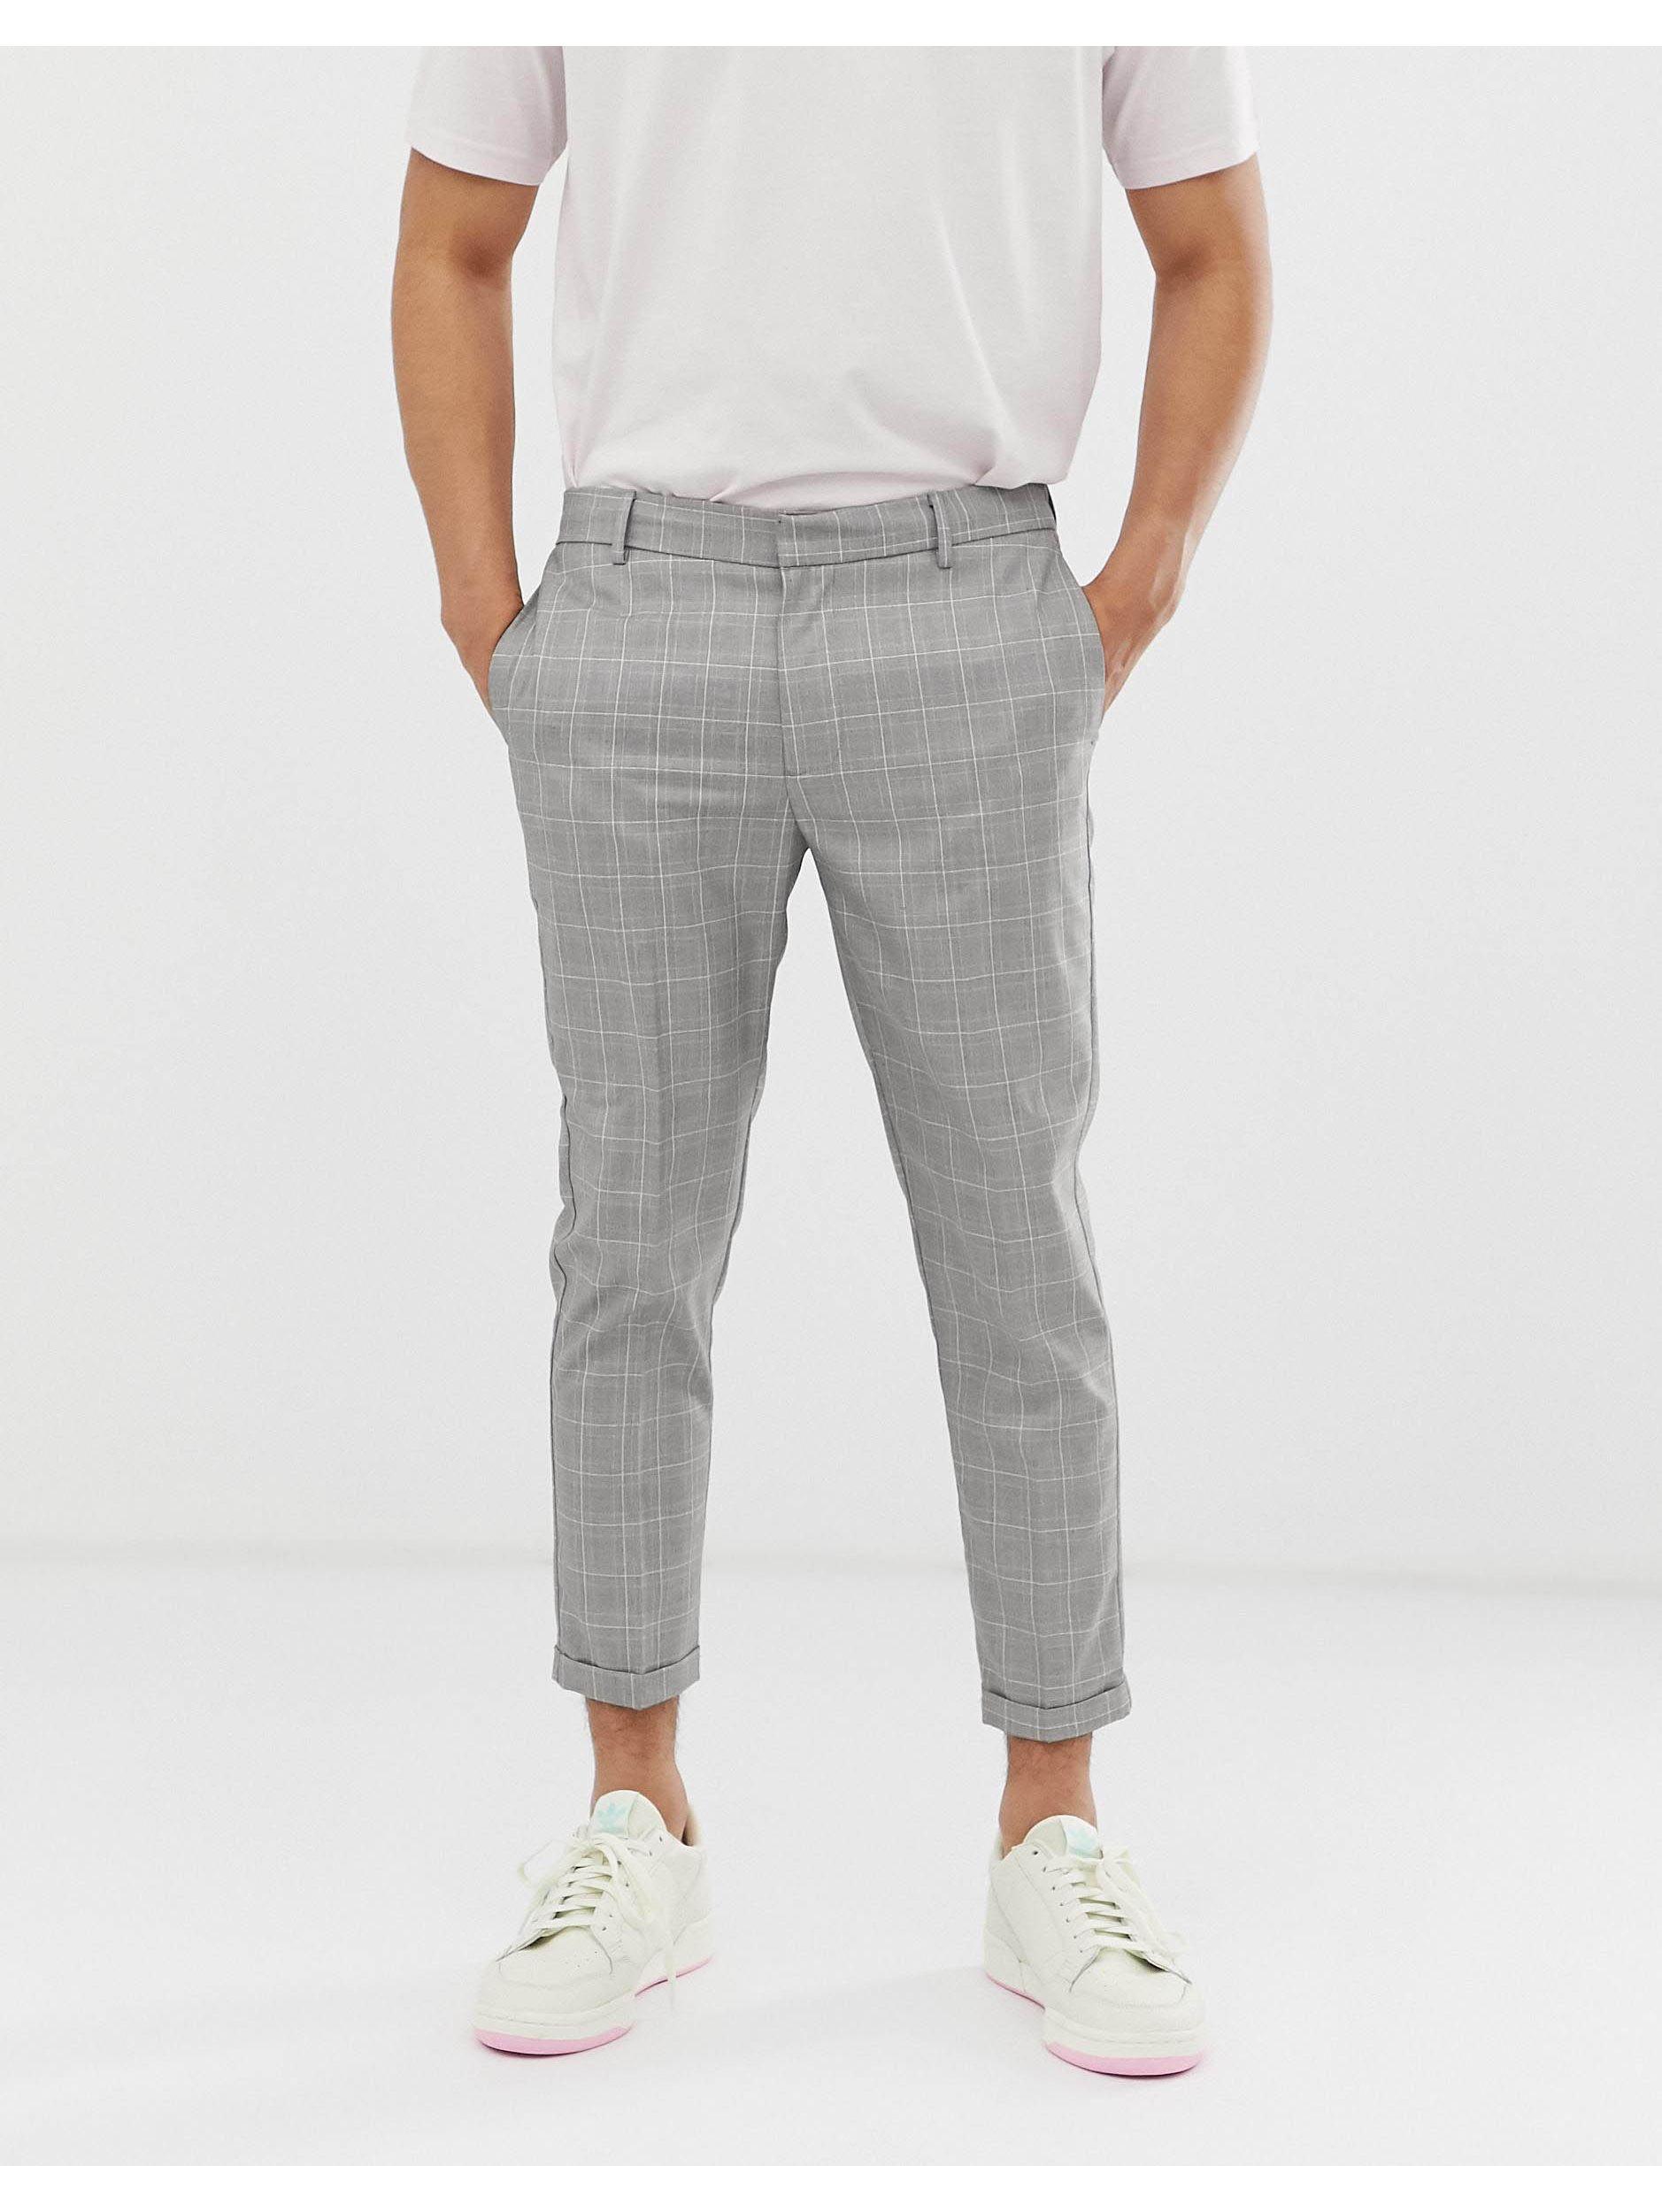 SELECTED Casual Trousers  Buy SELECTED Flex Smart Grey Trouser Online   Nykaa Fashion